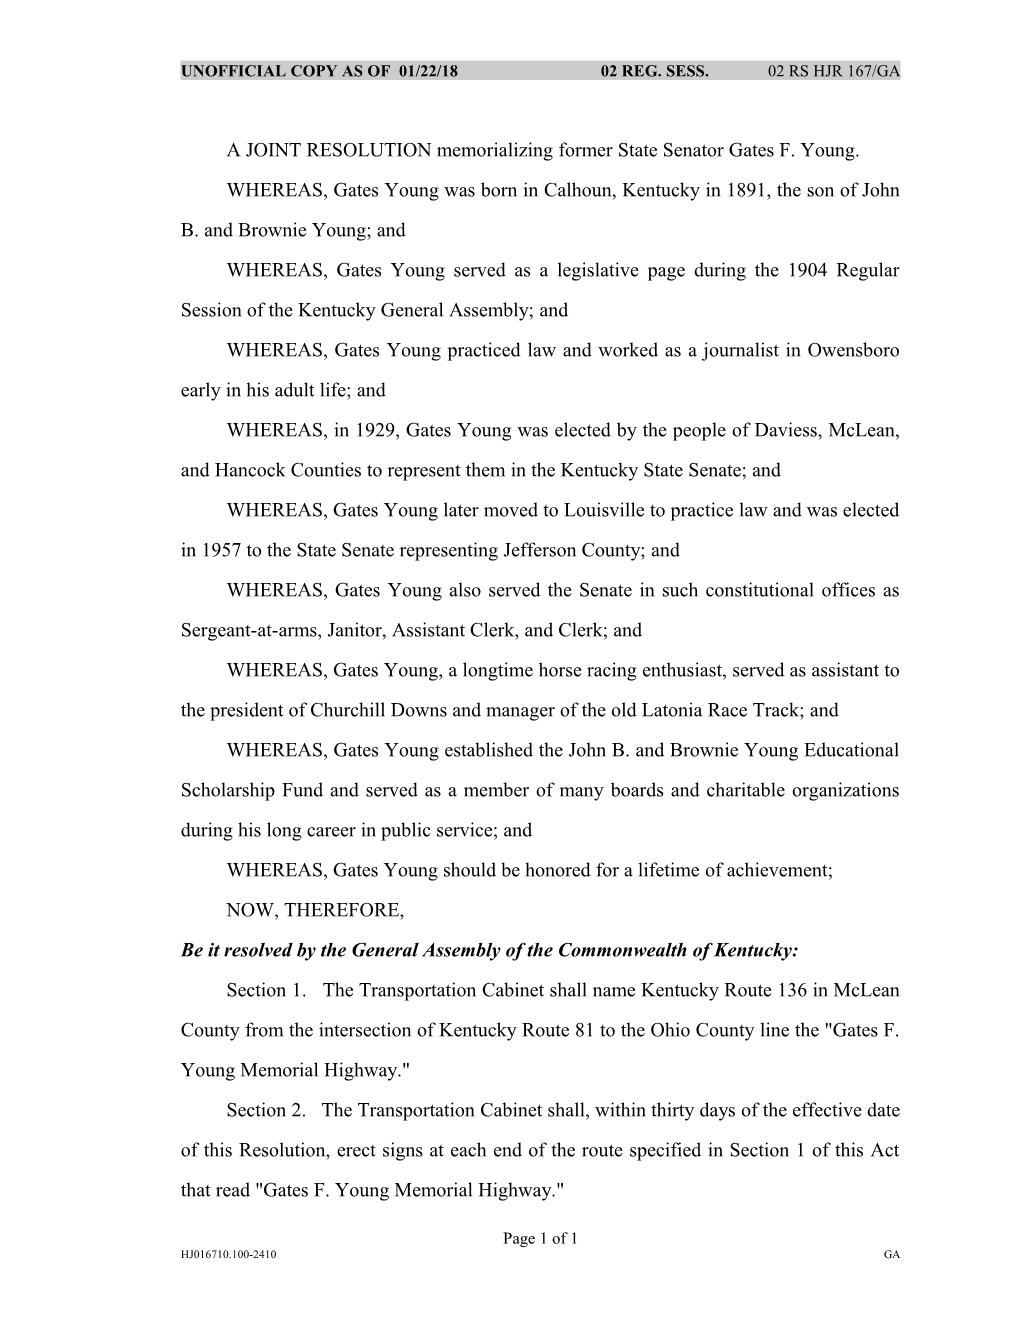 A JOINT RESOLUTION Memorializing Former State Senator Gates F. Young